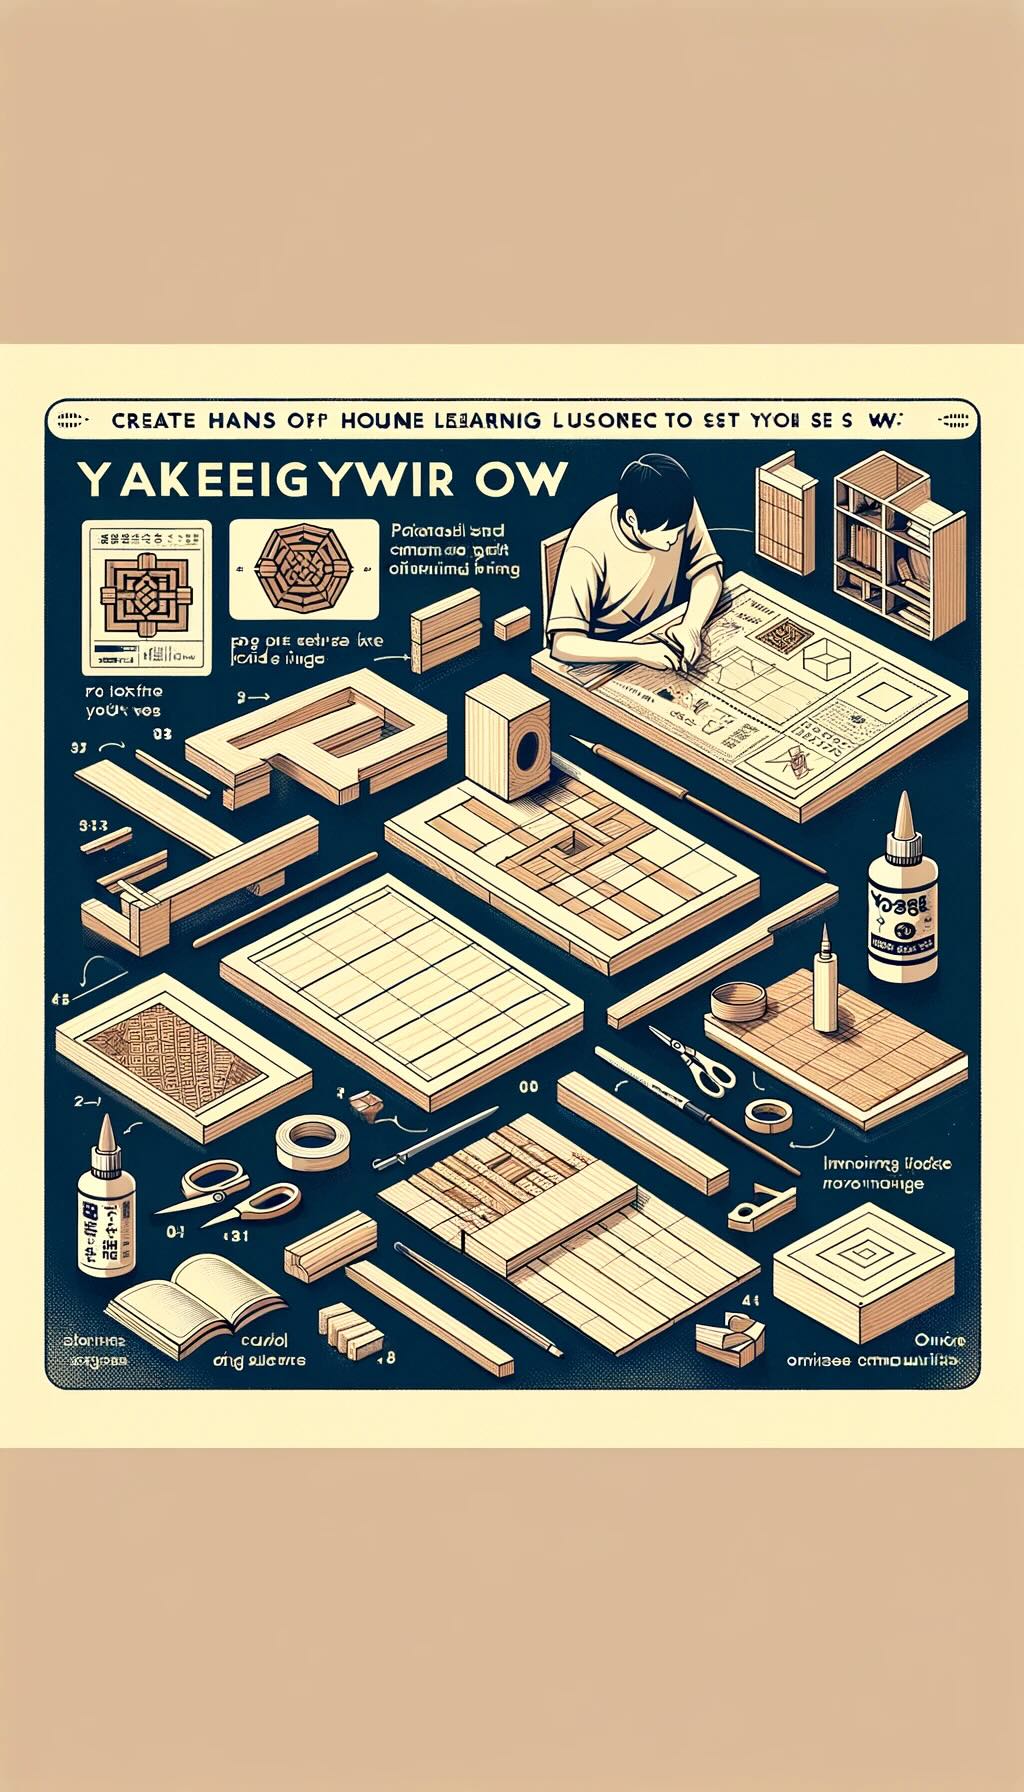 Hands-on experience of making your own Yosegi-zaiku. It depicts the process of creating a simple Yosegi-zaiku piece using a DIY kit, highlighting elements like pre-cut wood pieces, glue, and a beginner working on a geometric pattern includes representations of resources for home learning, such as online tutorials and involvement in online communities, capturing the accessibility and rewarding nature of learning this traditional Japanese craft.